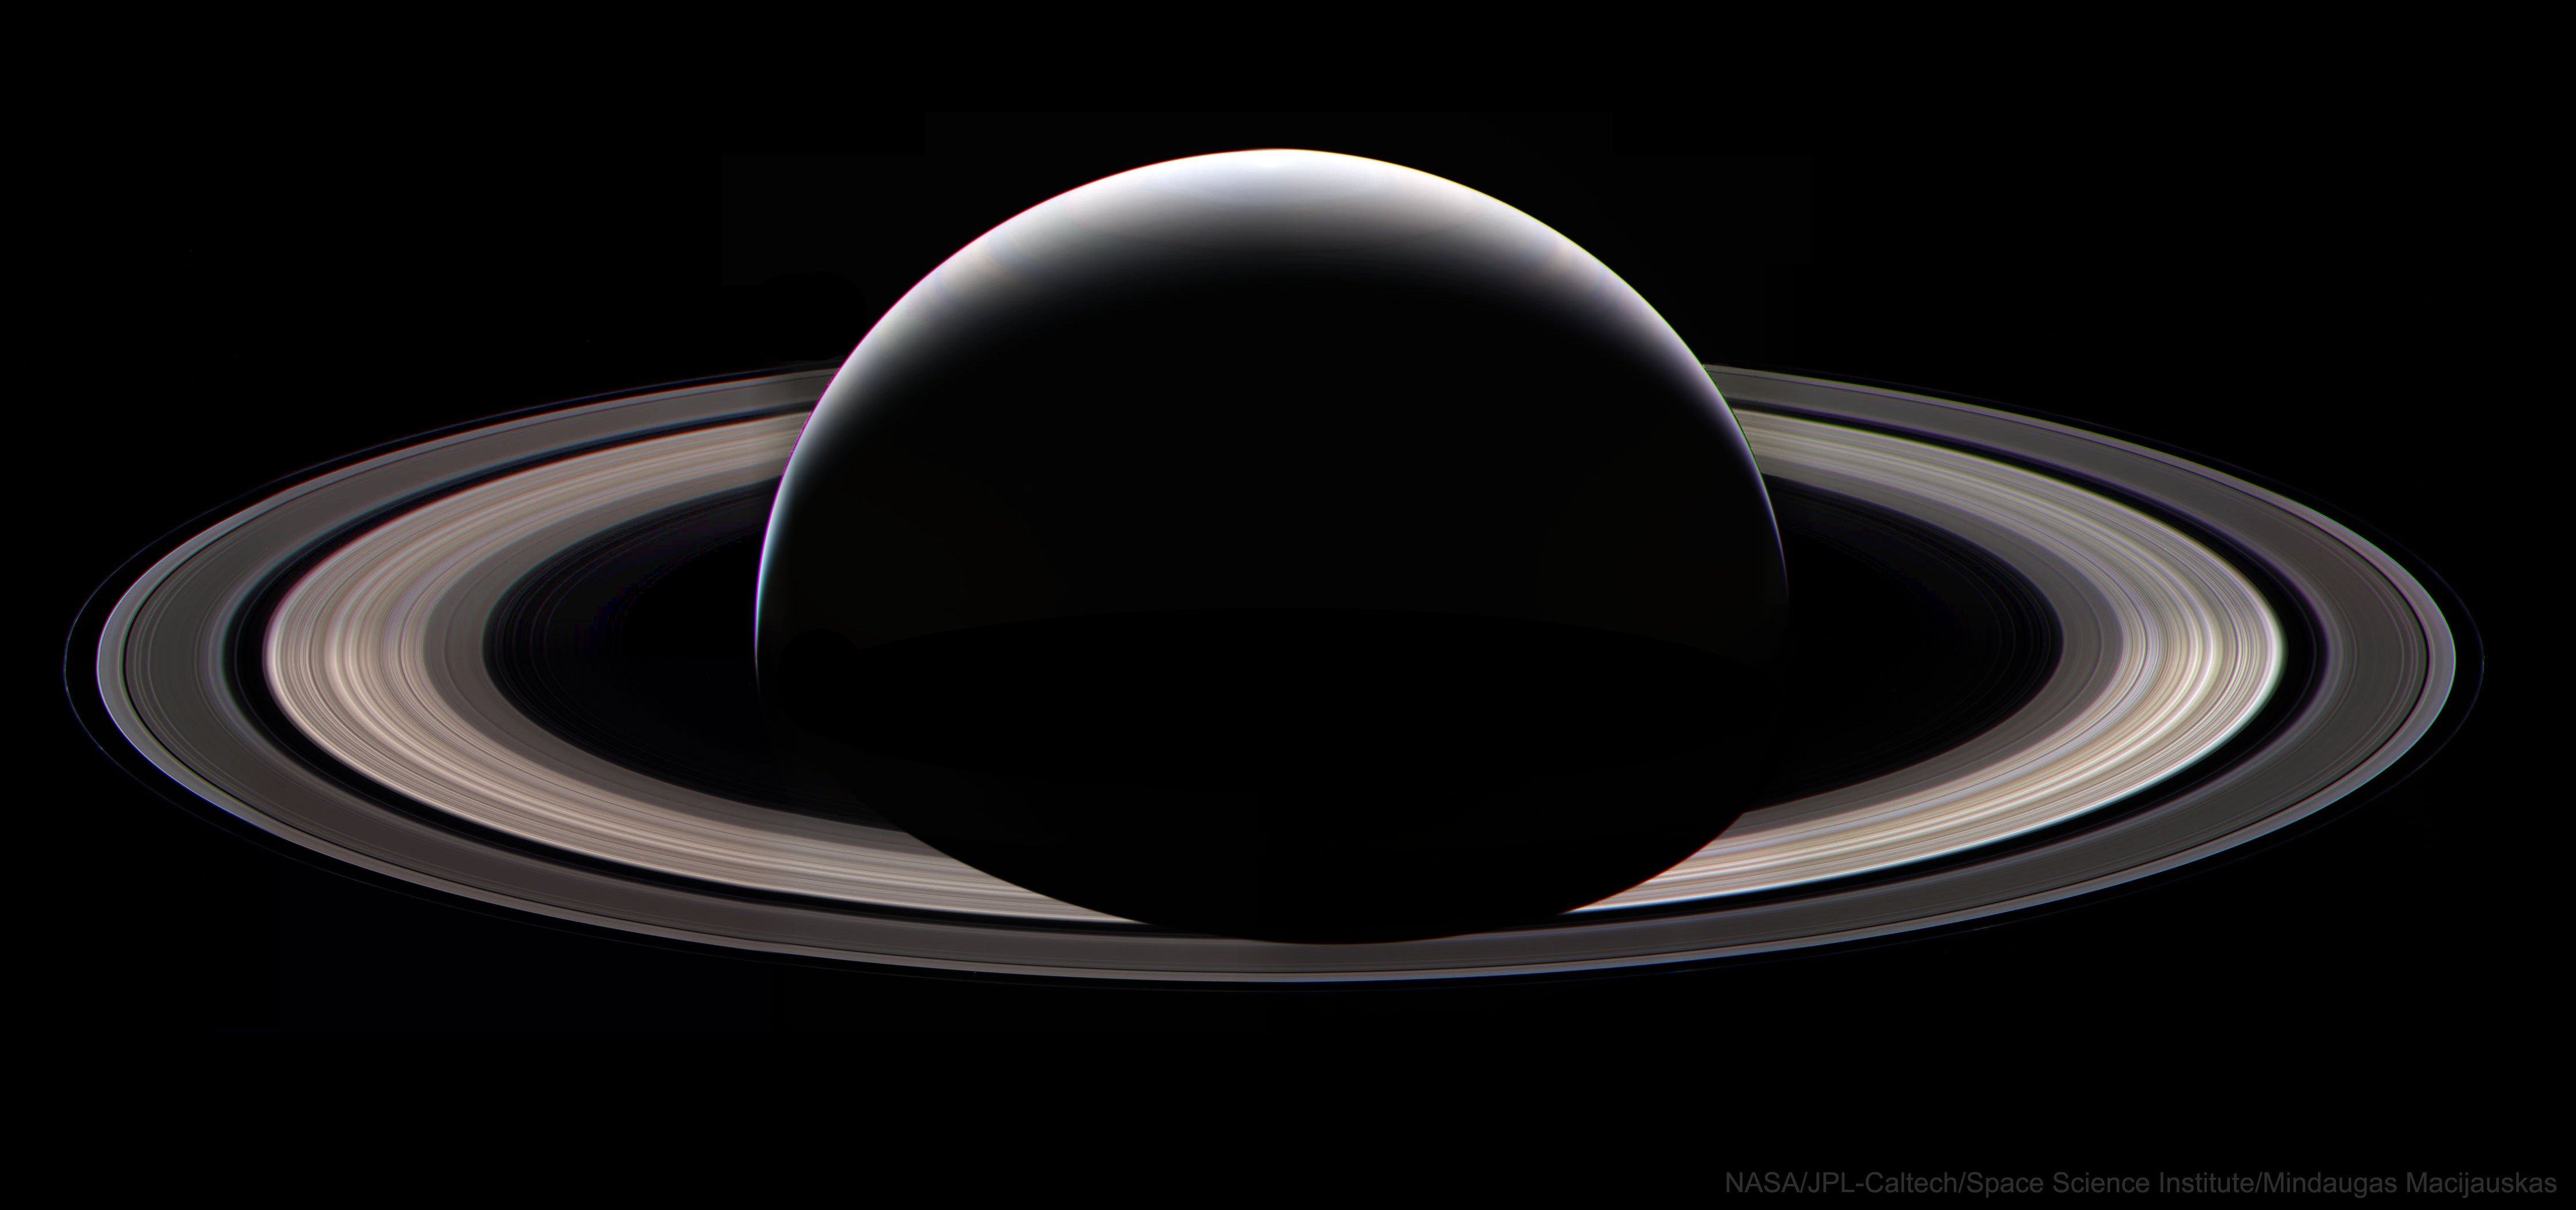 General 4472x2101 Saturn NASA space planet simple background watermarked low light black background